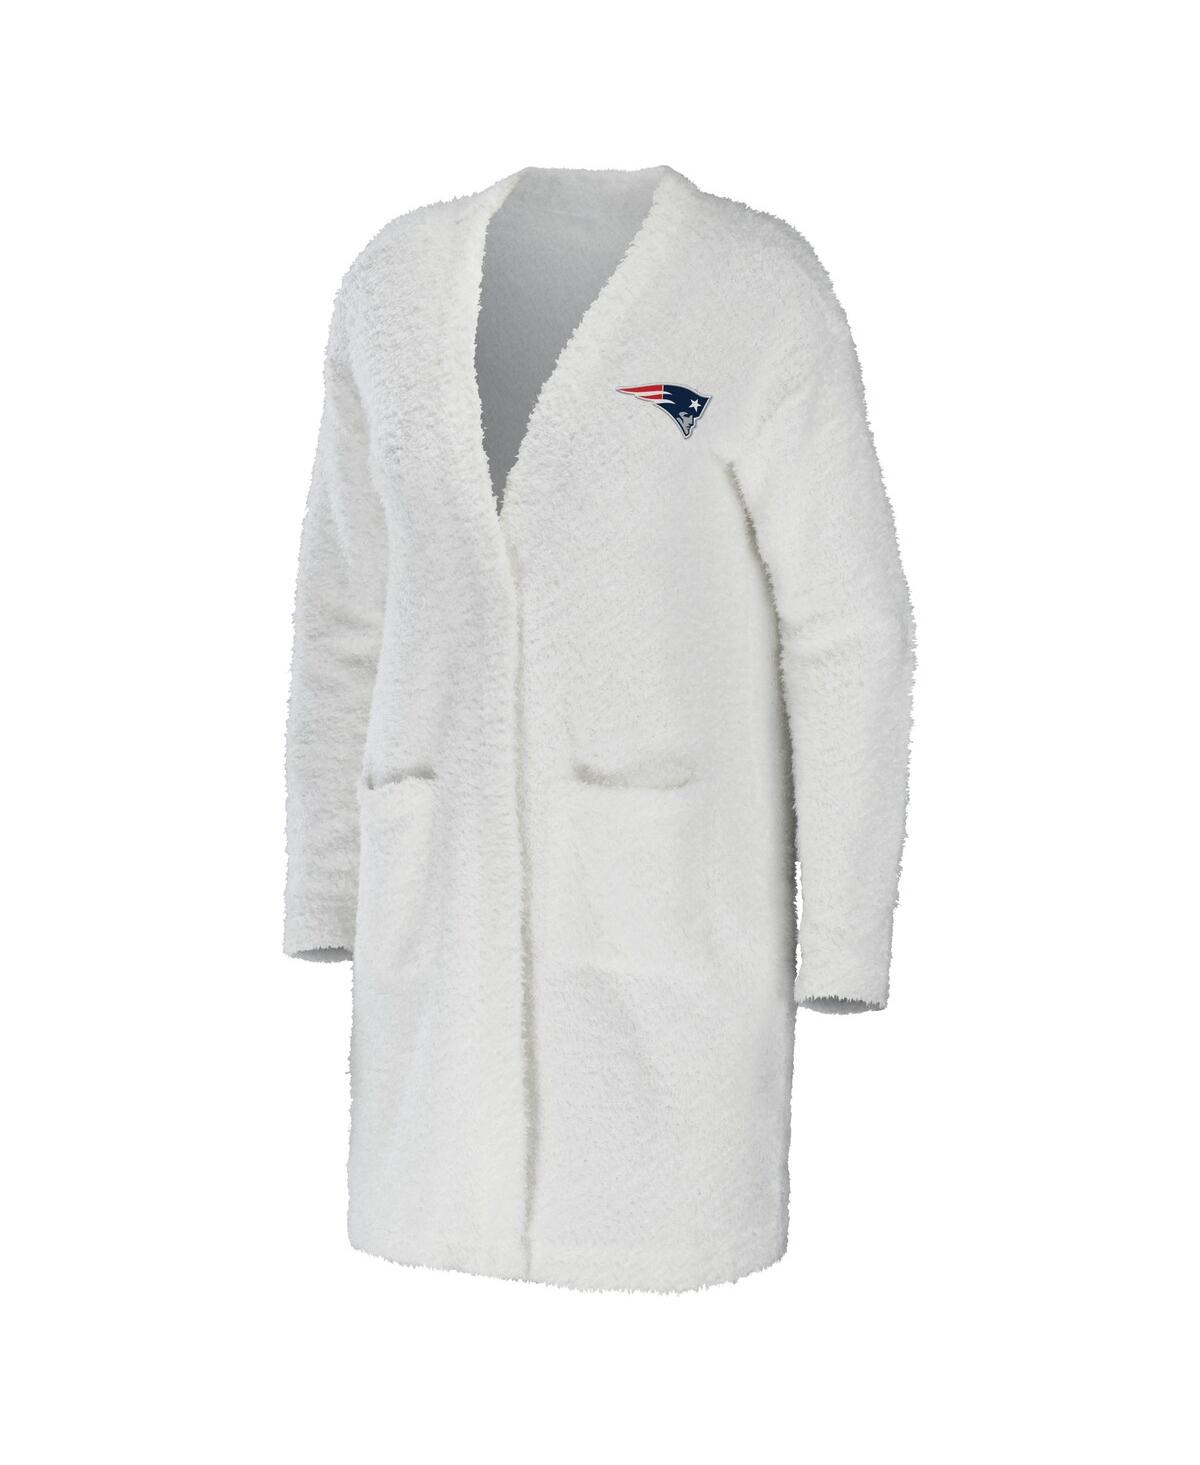 Shop Wear By Erin Andrews Women's  Cream New England Patriots Cozy Lounge Cardigan Sweater